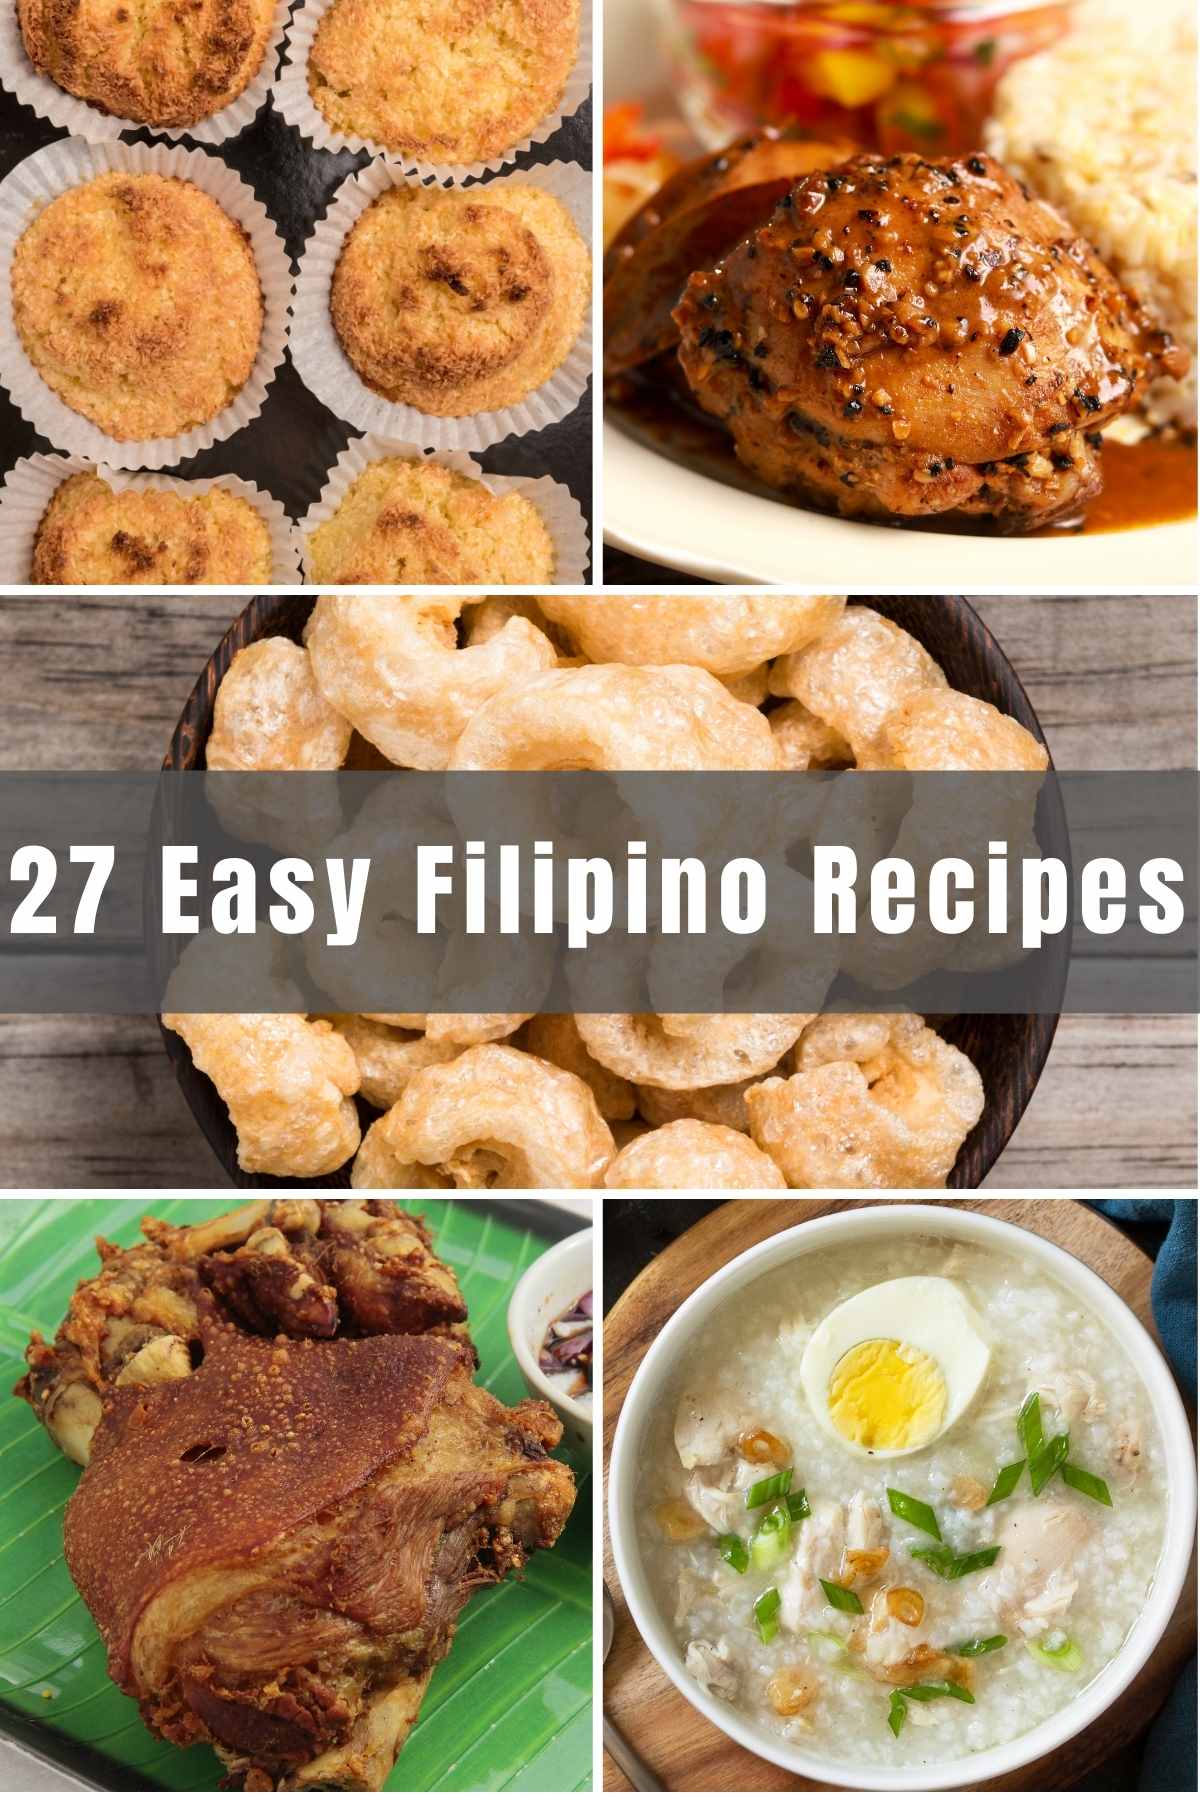 Known for its balance of sweet, salty, and sour flavors, Filipino food has grown in popularity over the years, and is a favorite among foodies. If you’re a fan of Asian dishes or are interested in trying something new, Filipino Recipes could be just what you’re looking for. From succulent pork dishes, to creamy desserts, there’s something here for everyone!